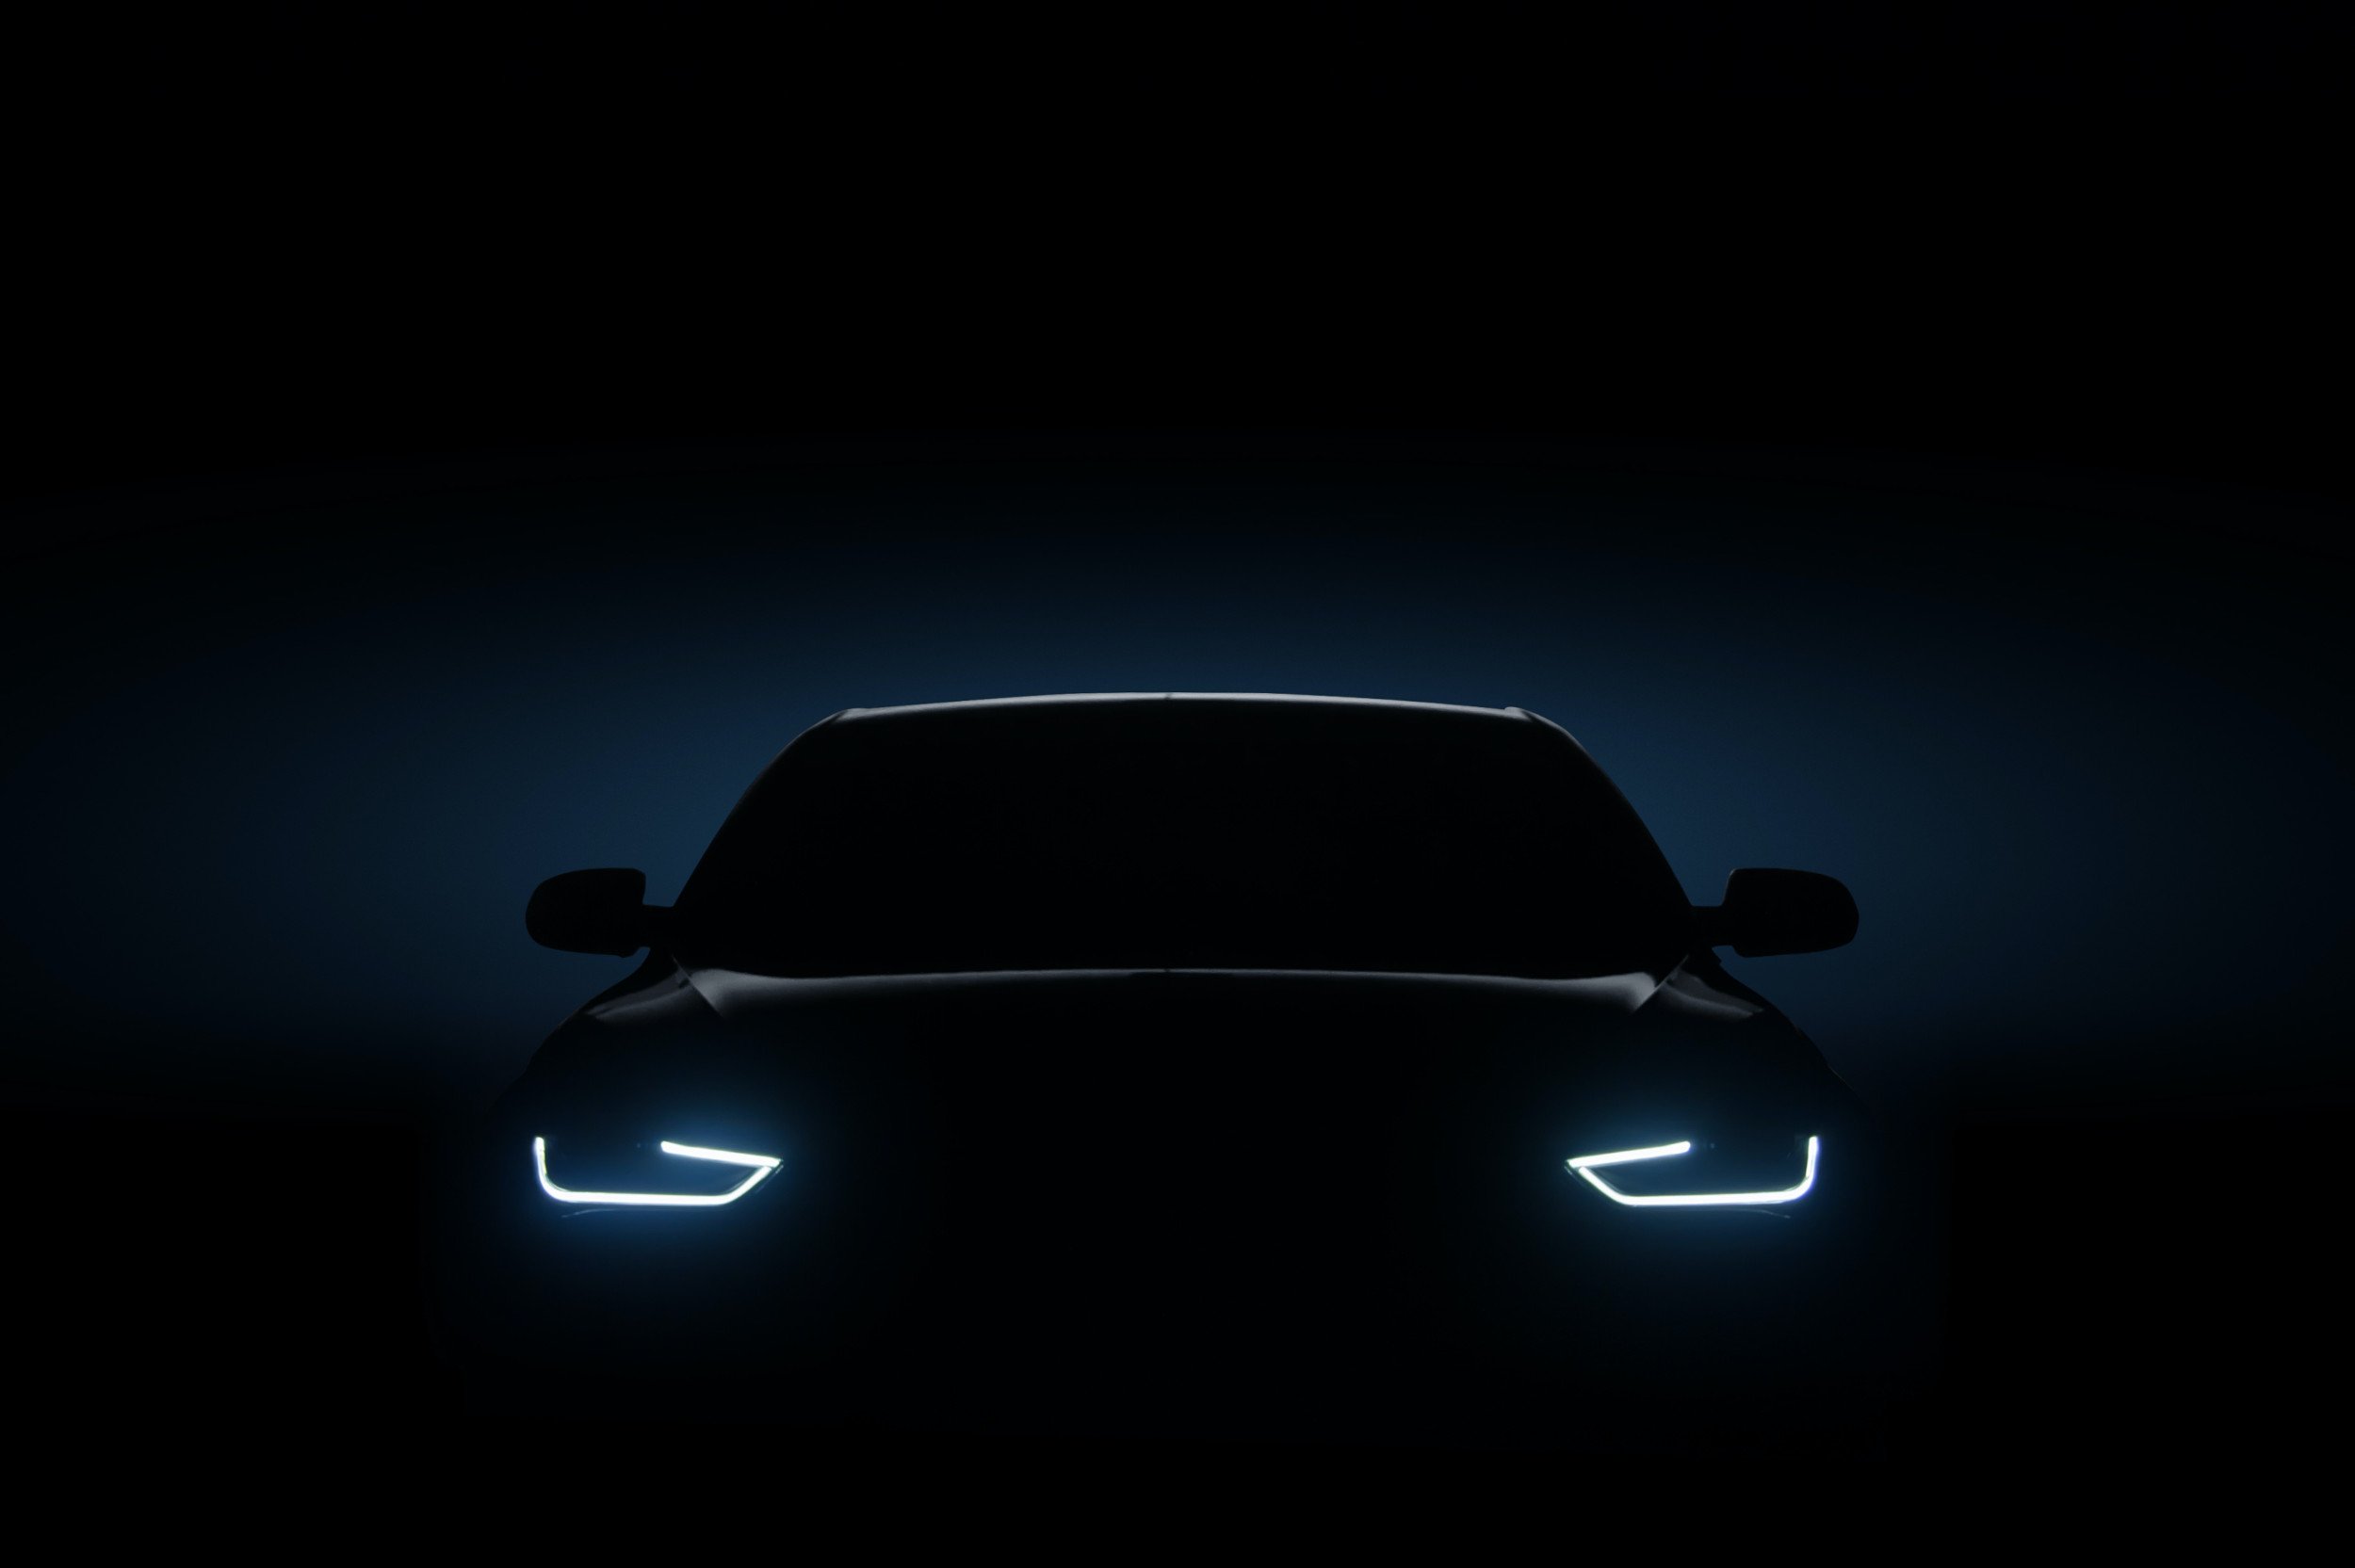 Car in the dark with headlights on